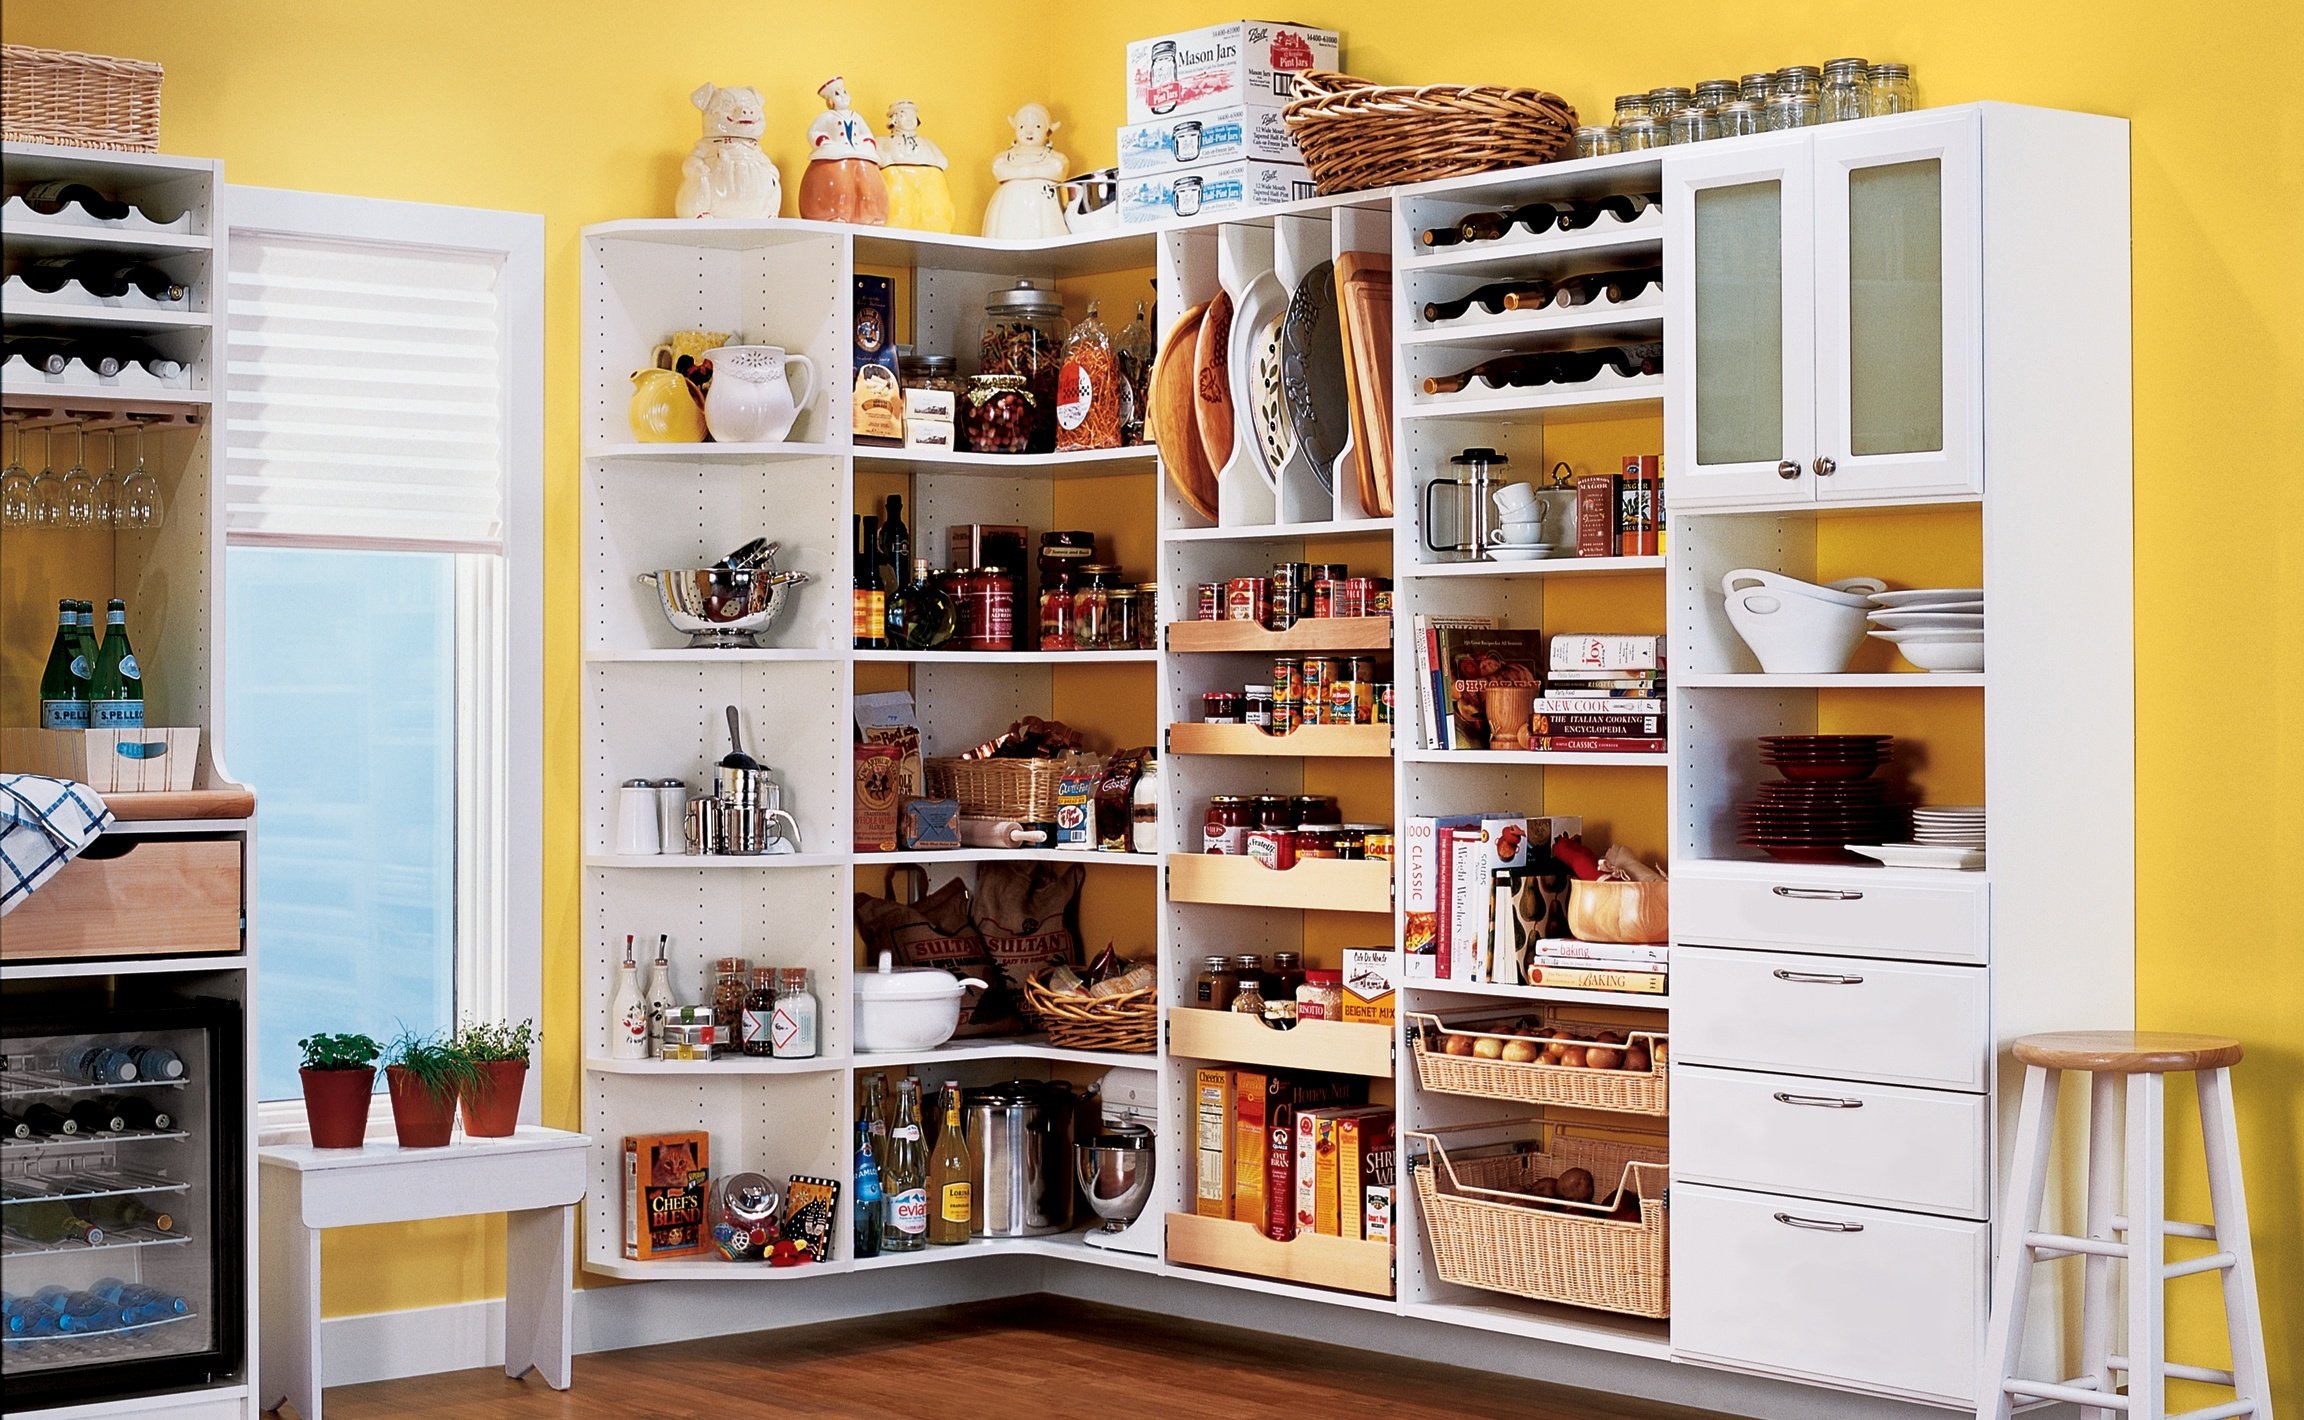 Kitchen Upgrade: 10 Simple Kitchen Hacks That Make A Huge Difference